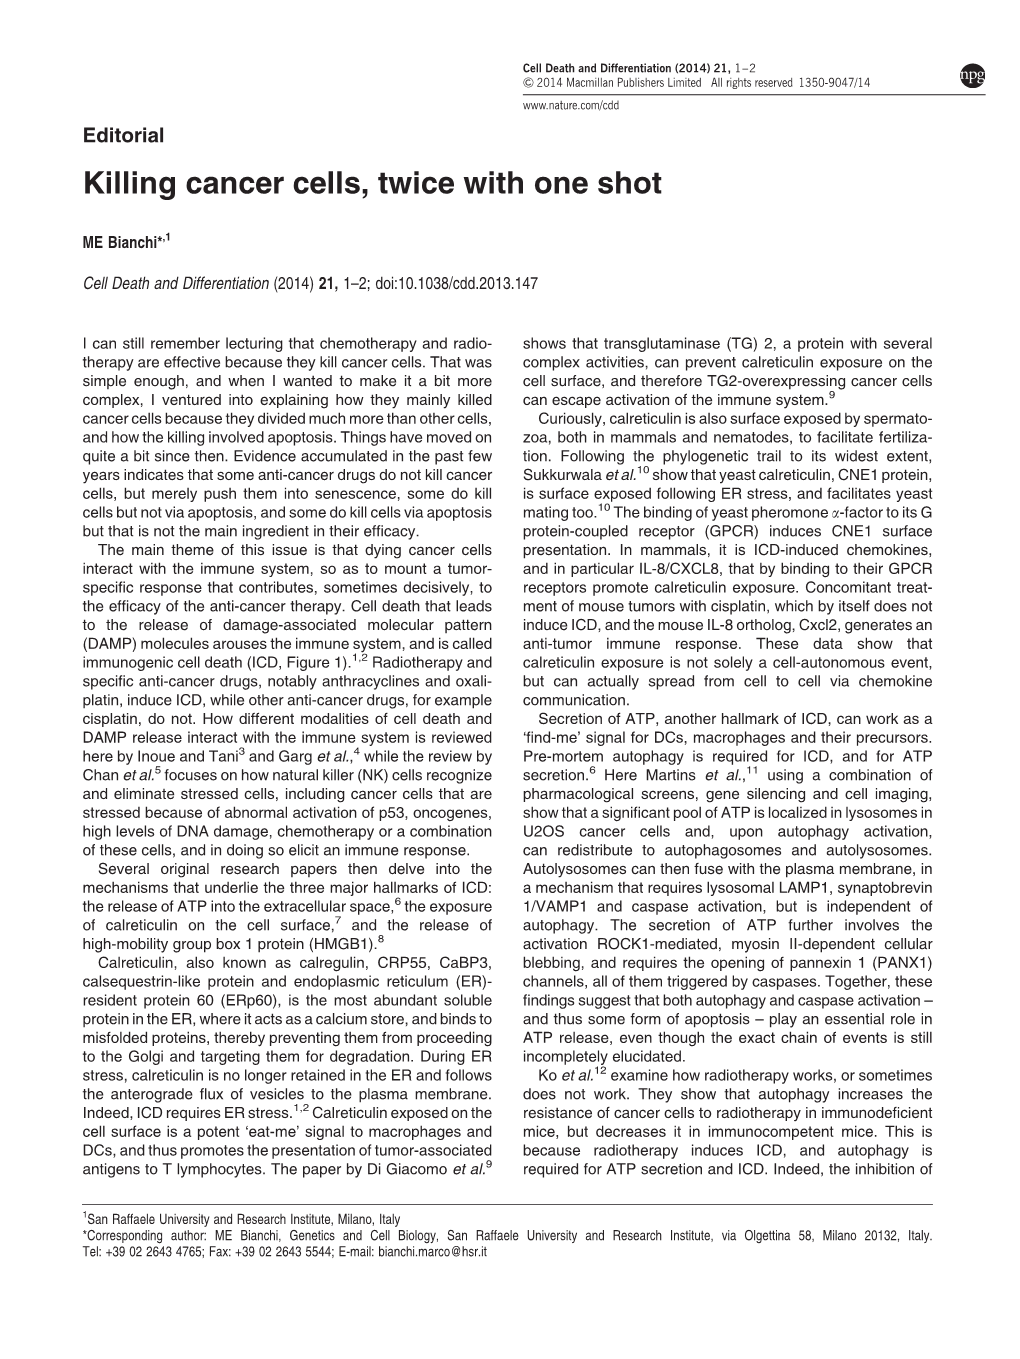 Killing Cancer Cells, Twice with One Shot